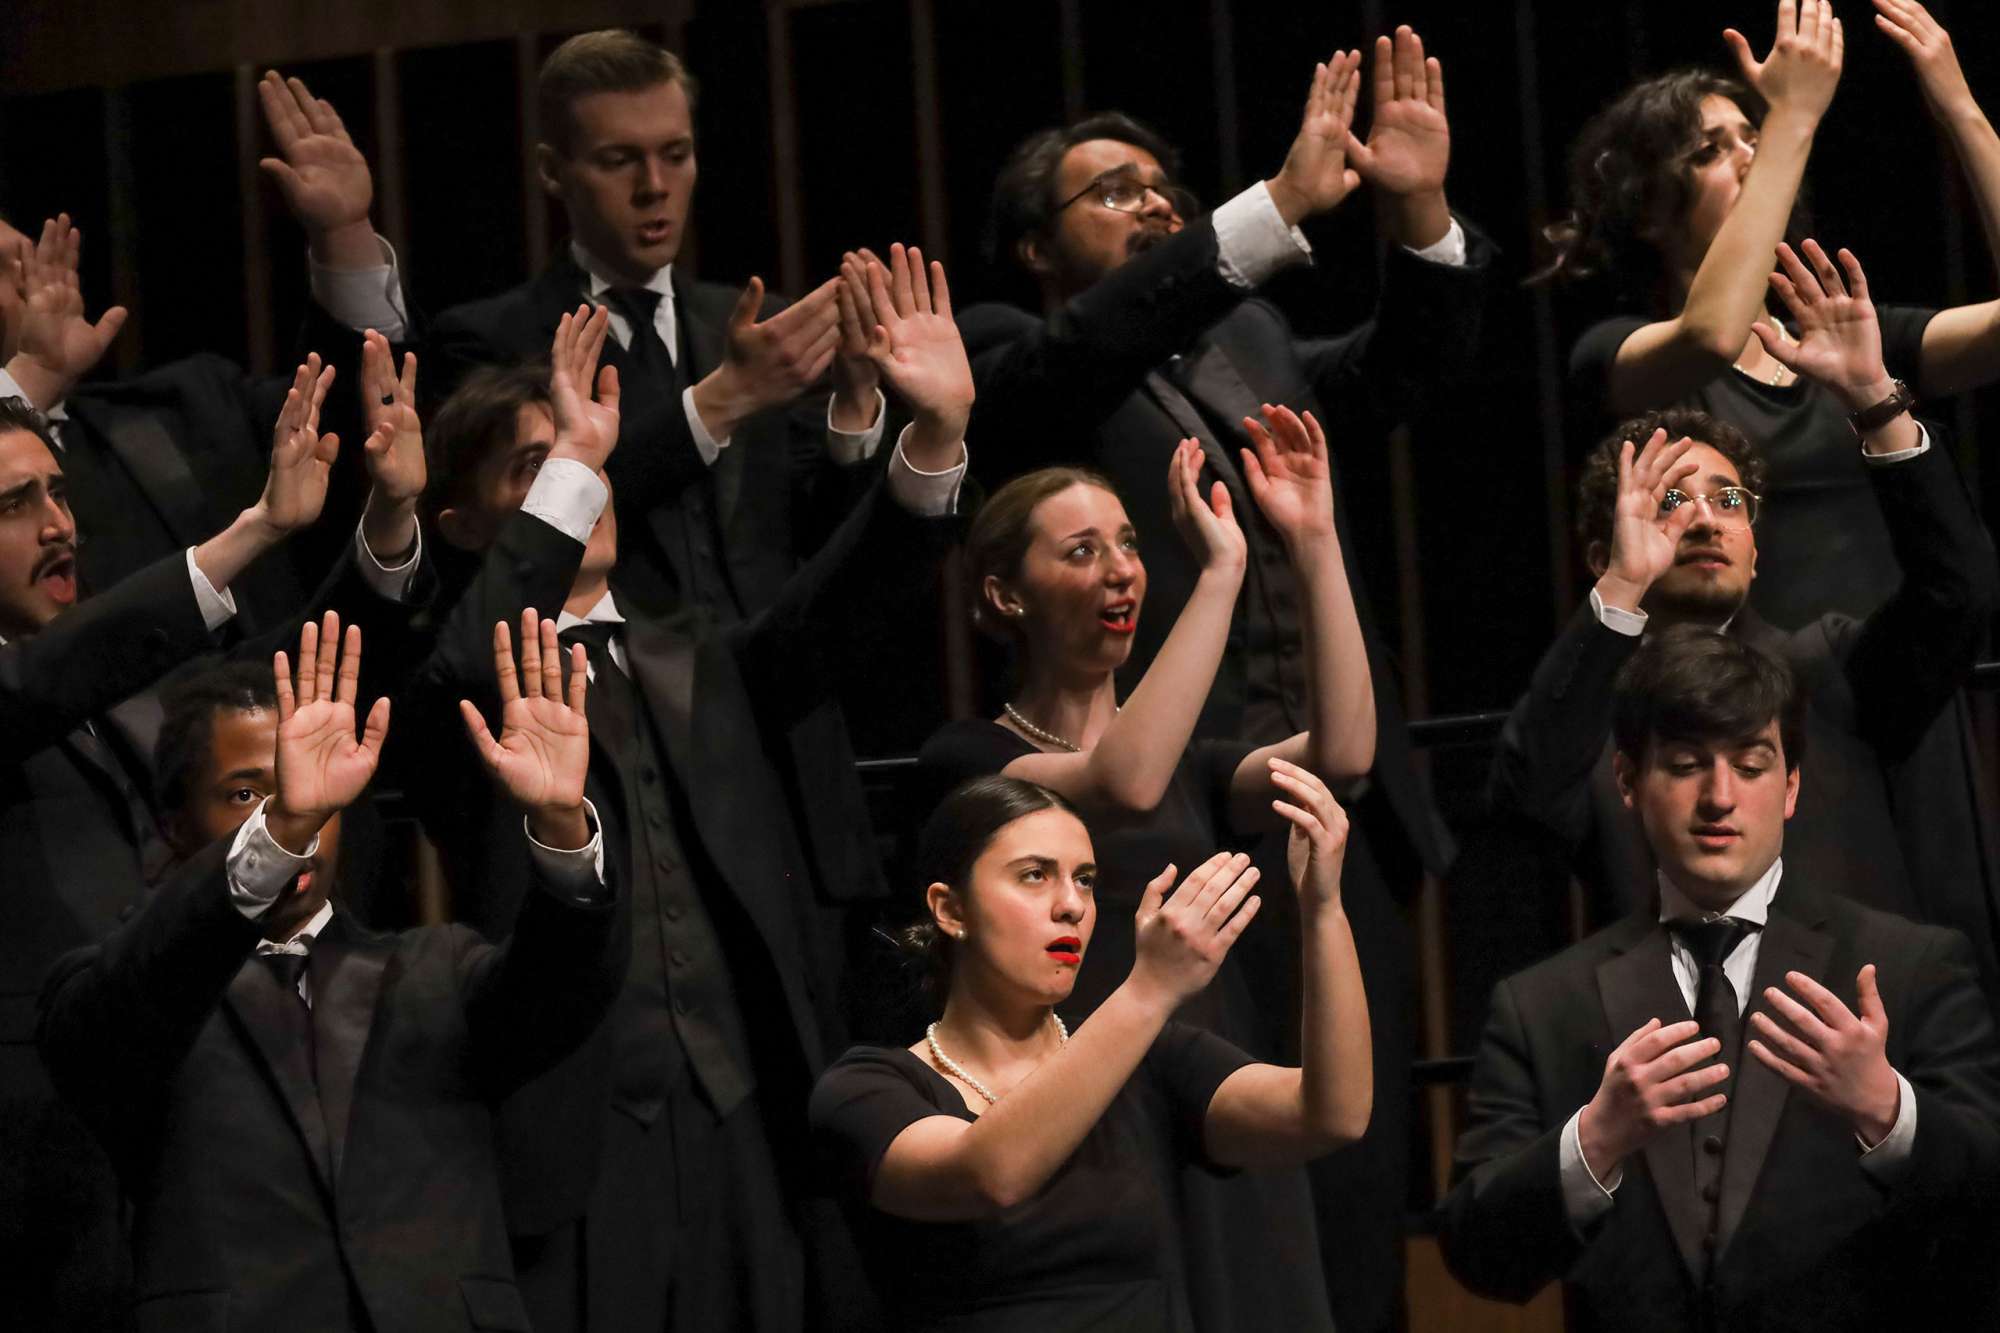 Singers make hand gestures during a song